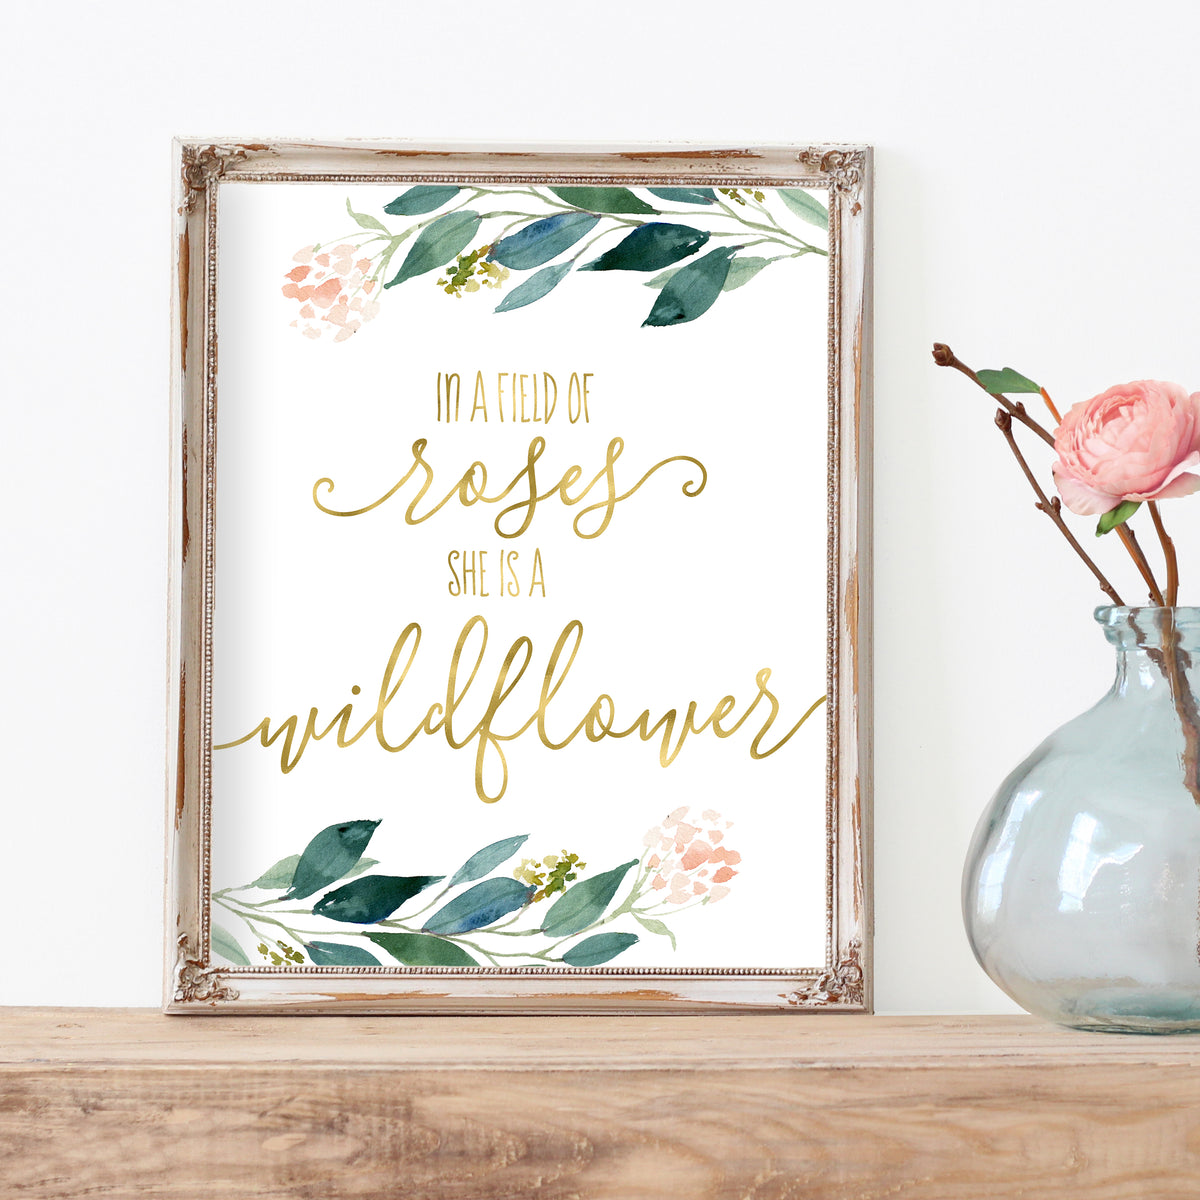 In a field of roses she is a wildflower – Mommy's Design Farm